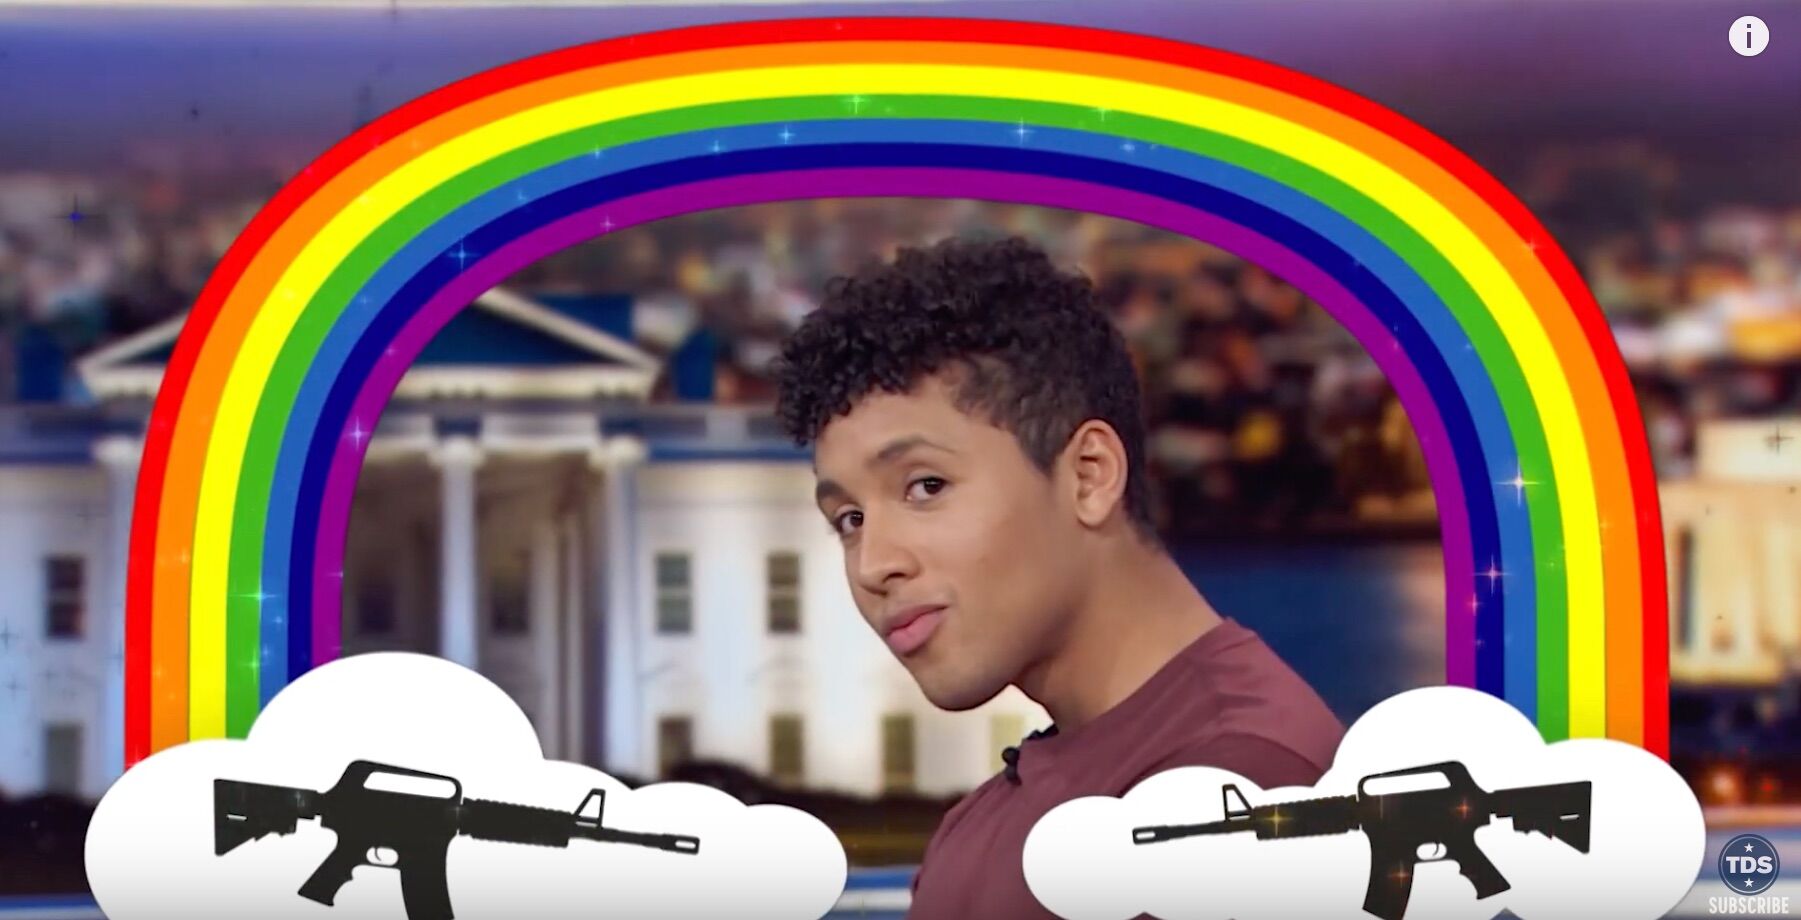 Jaboukie Young-White shows how gay guns are